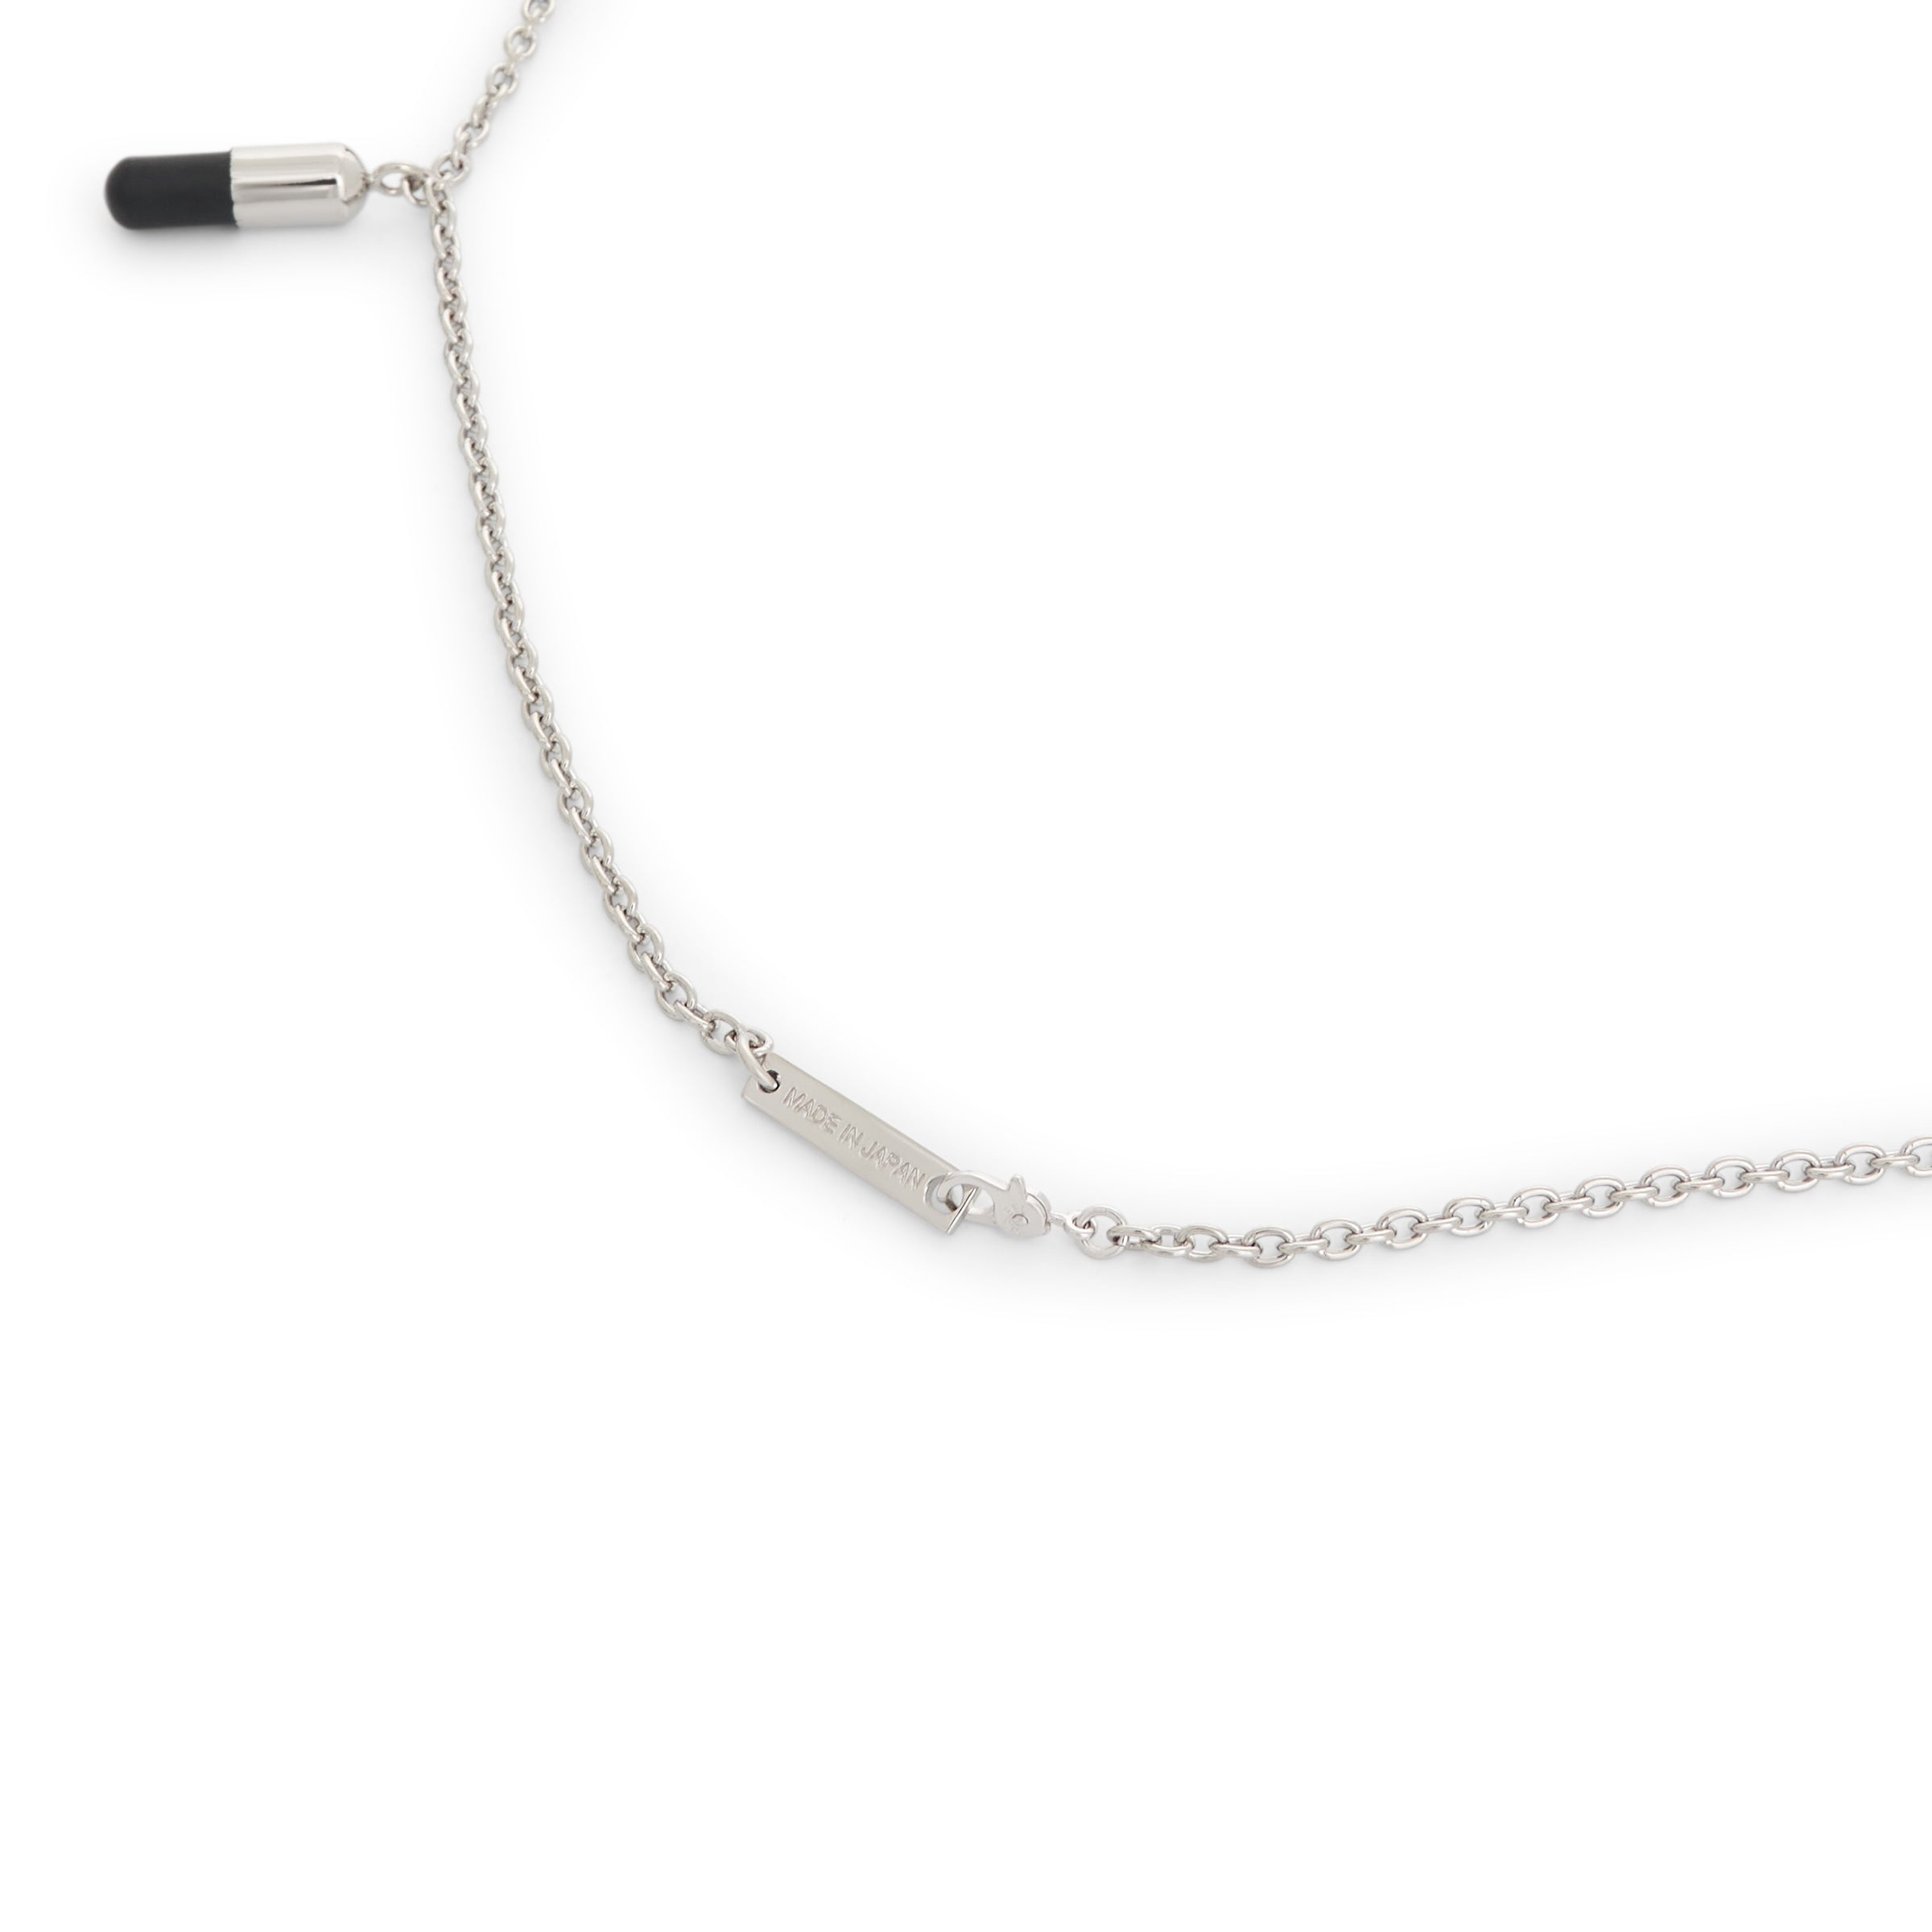 Multipill Charm Necklace in Silver/Black - 4